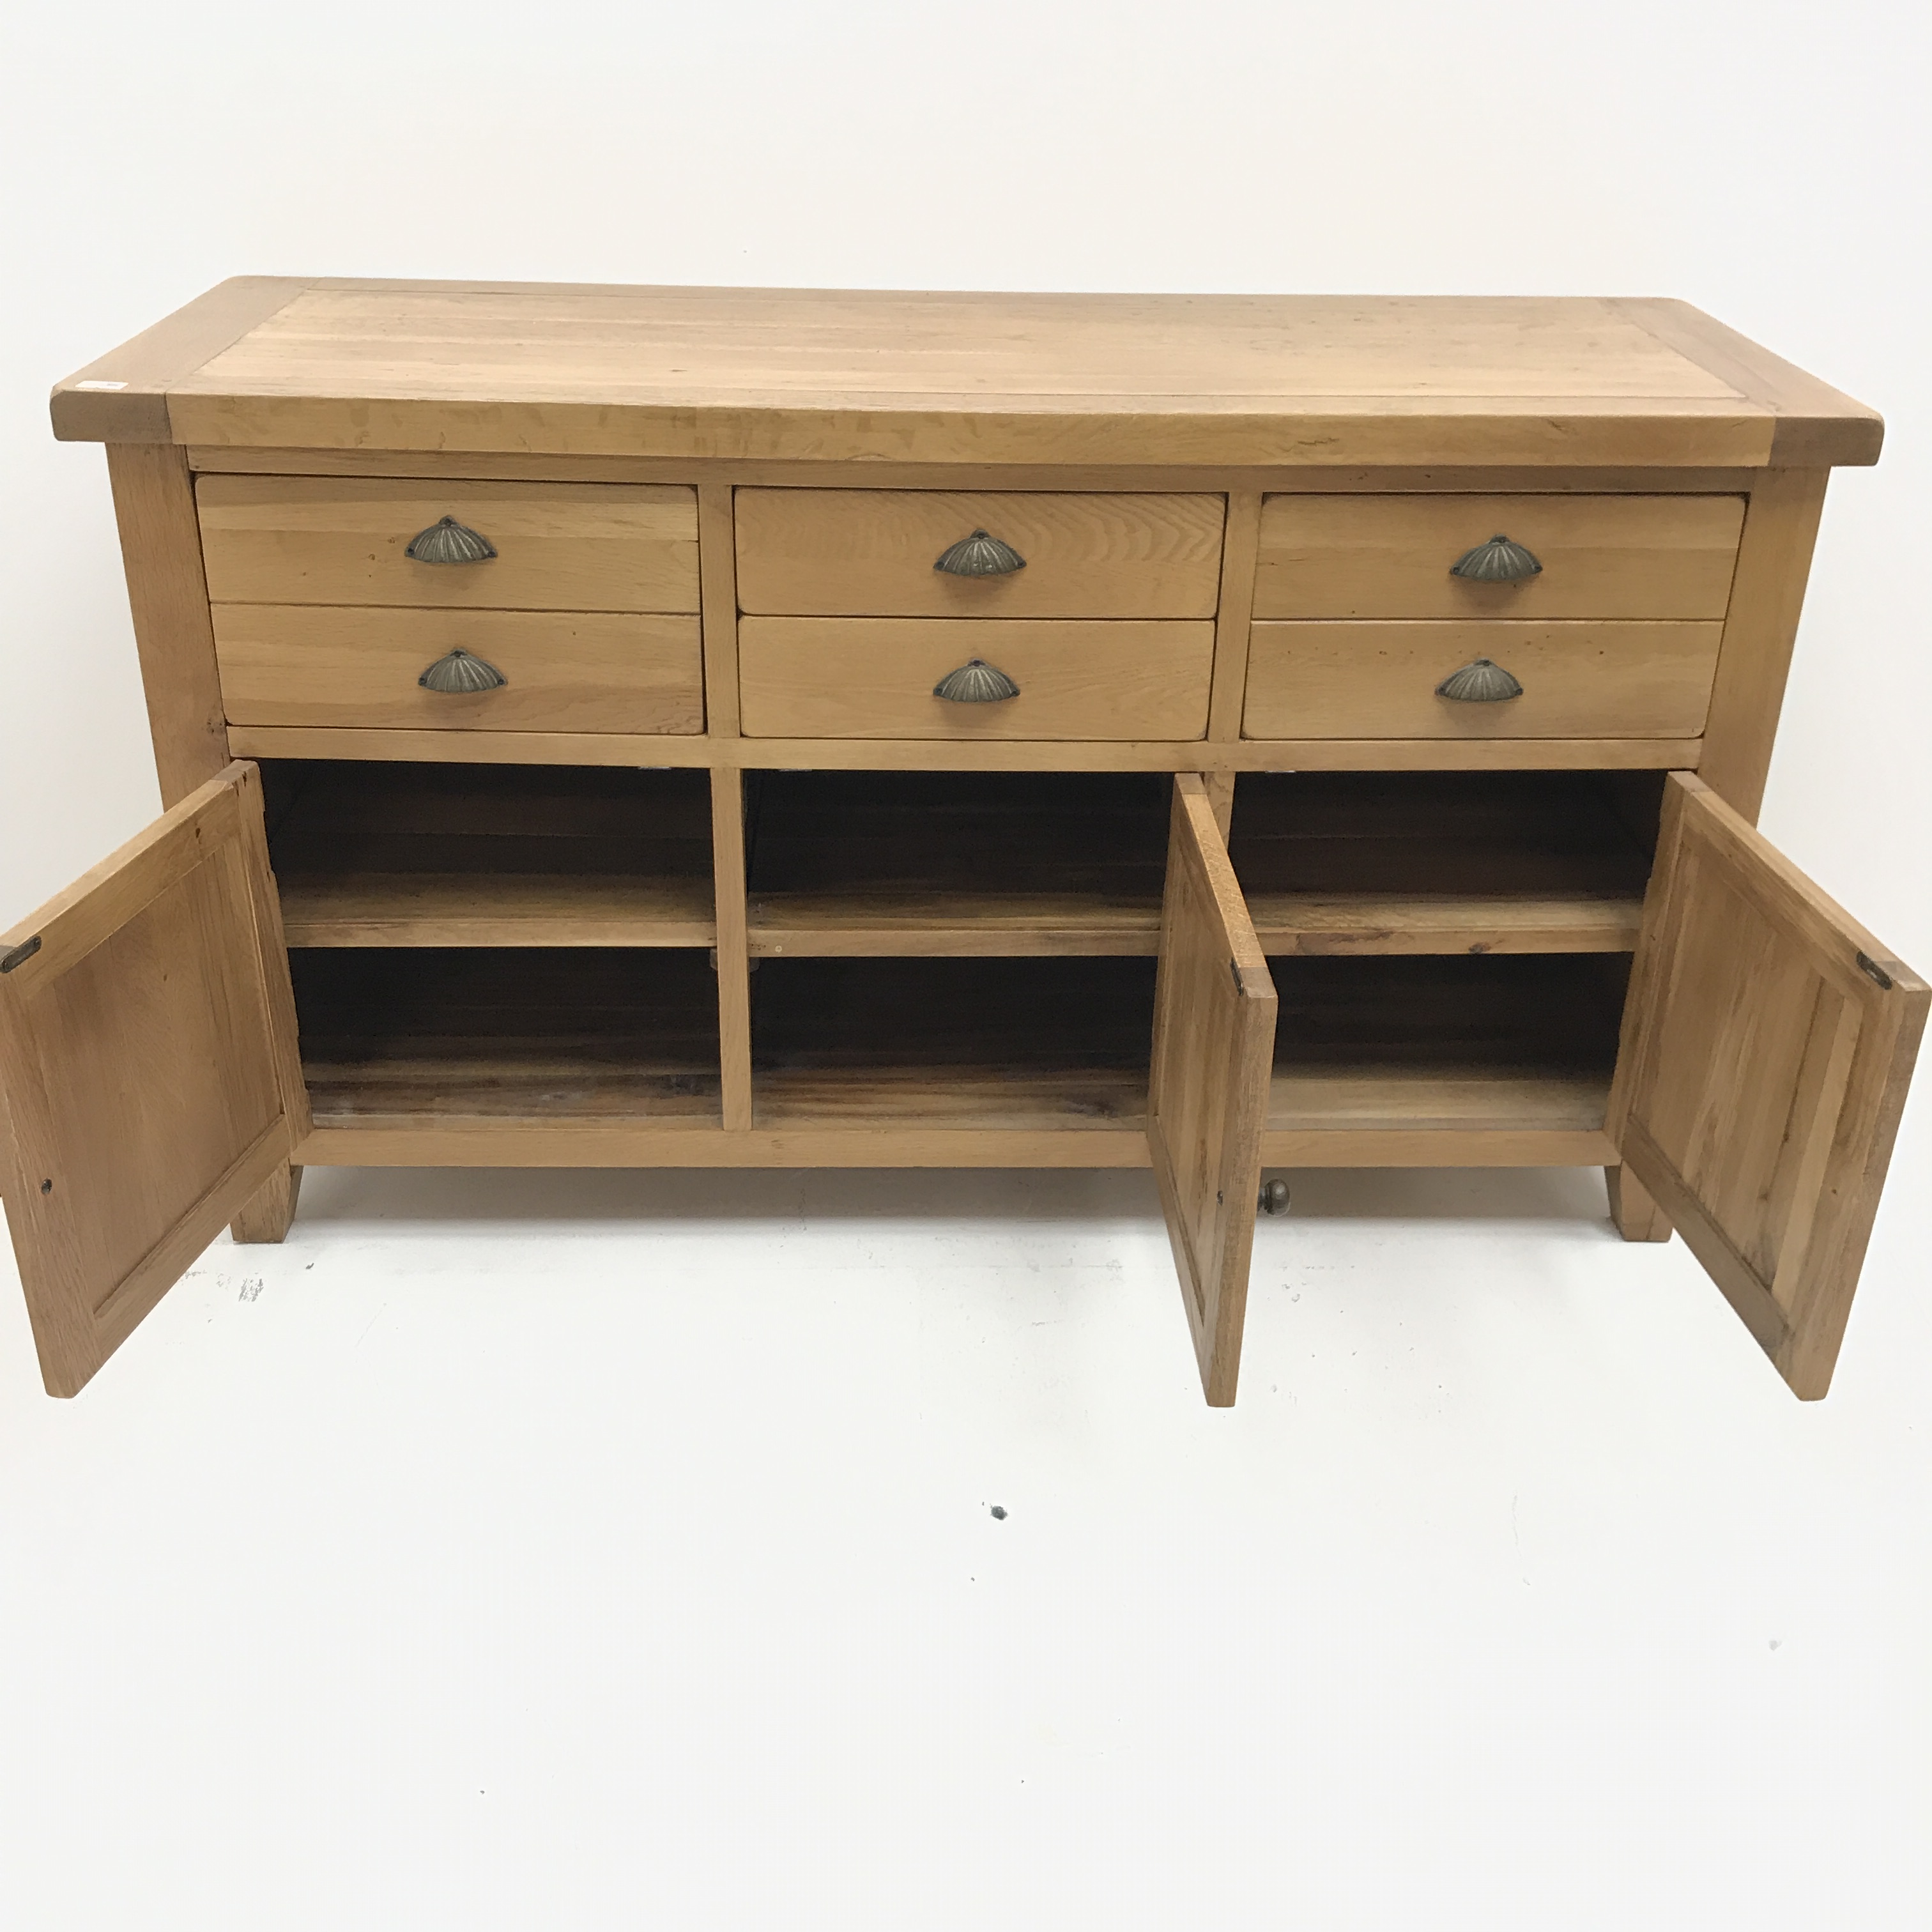 Light oak sideboard, four drawers above three cupboards, stile supports, W160cm, H91cm, - Image 5 of 6